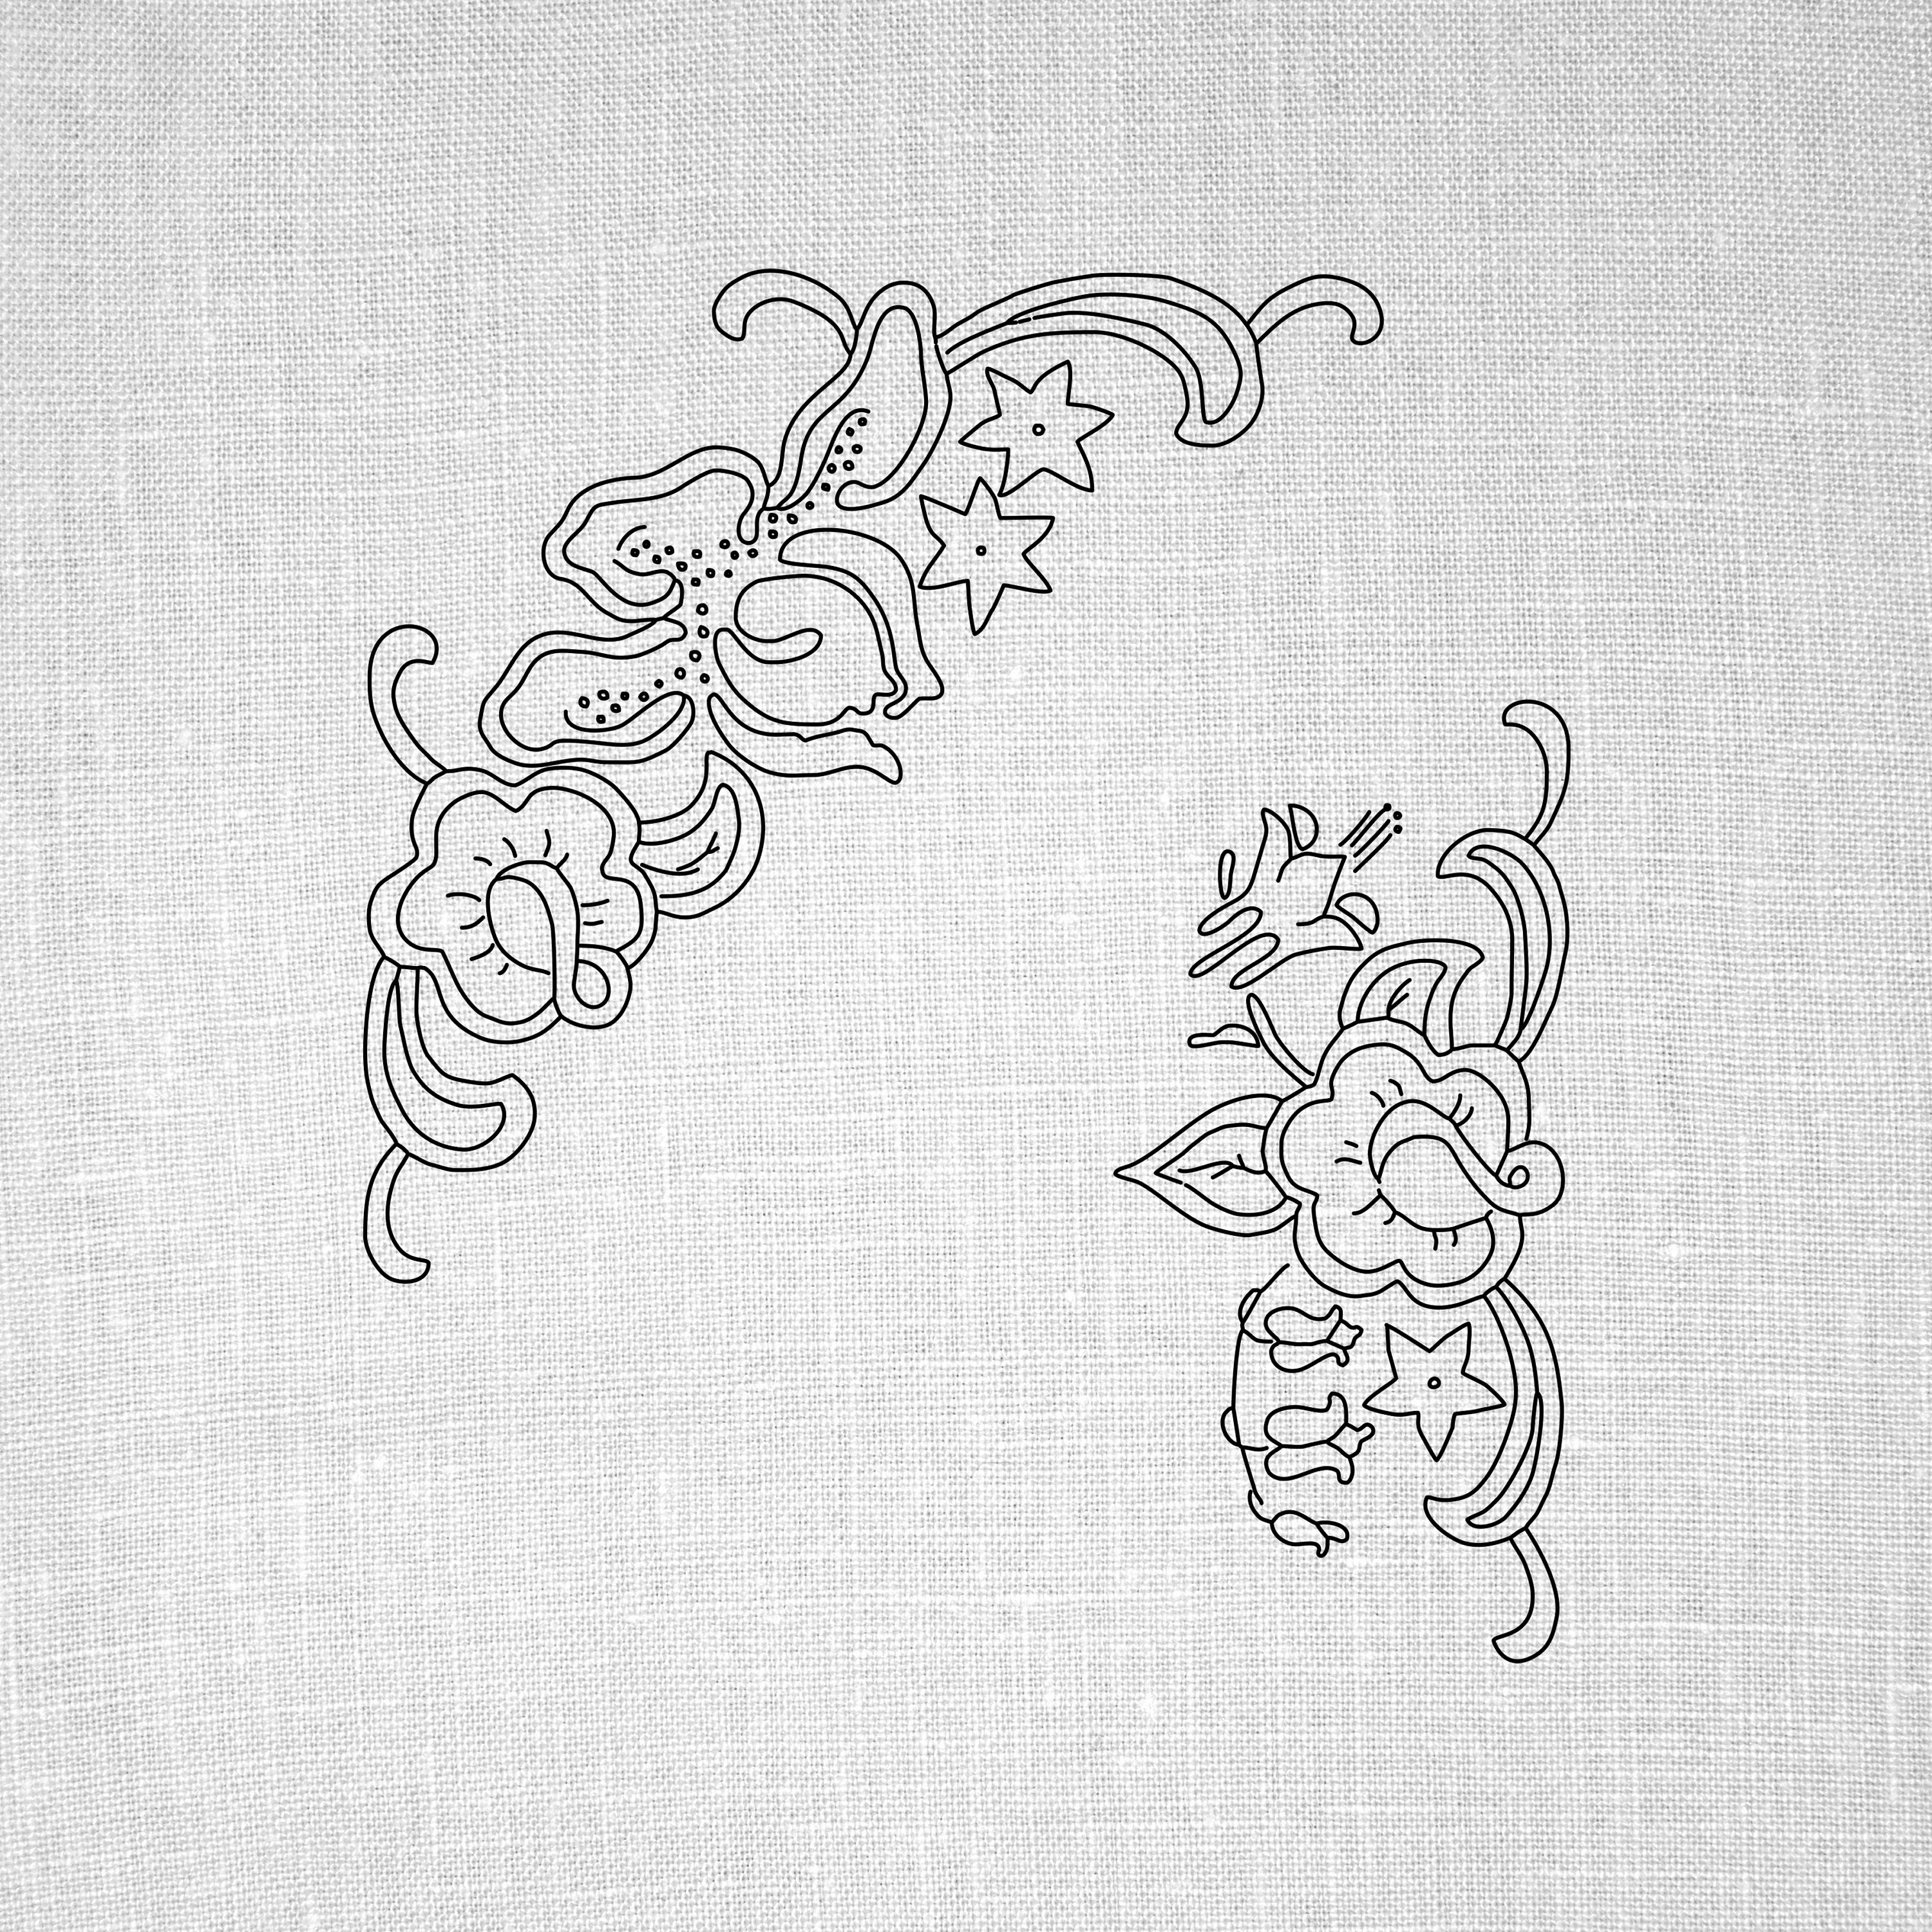 Free Vintage Embroidery Patterns Download Hand Embroidery Borders Hand Embroidery Embroidery Design Hand Embroidery Patterns Pdf Vintage Transfers Cowboy Border